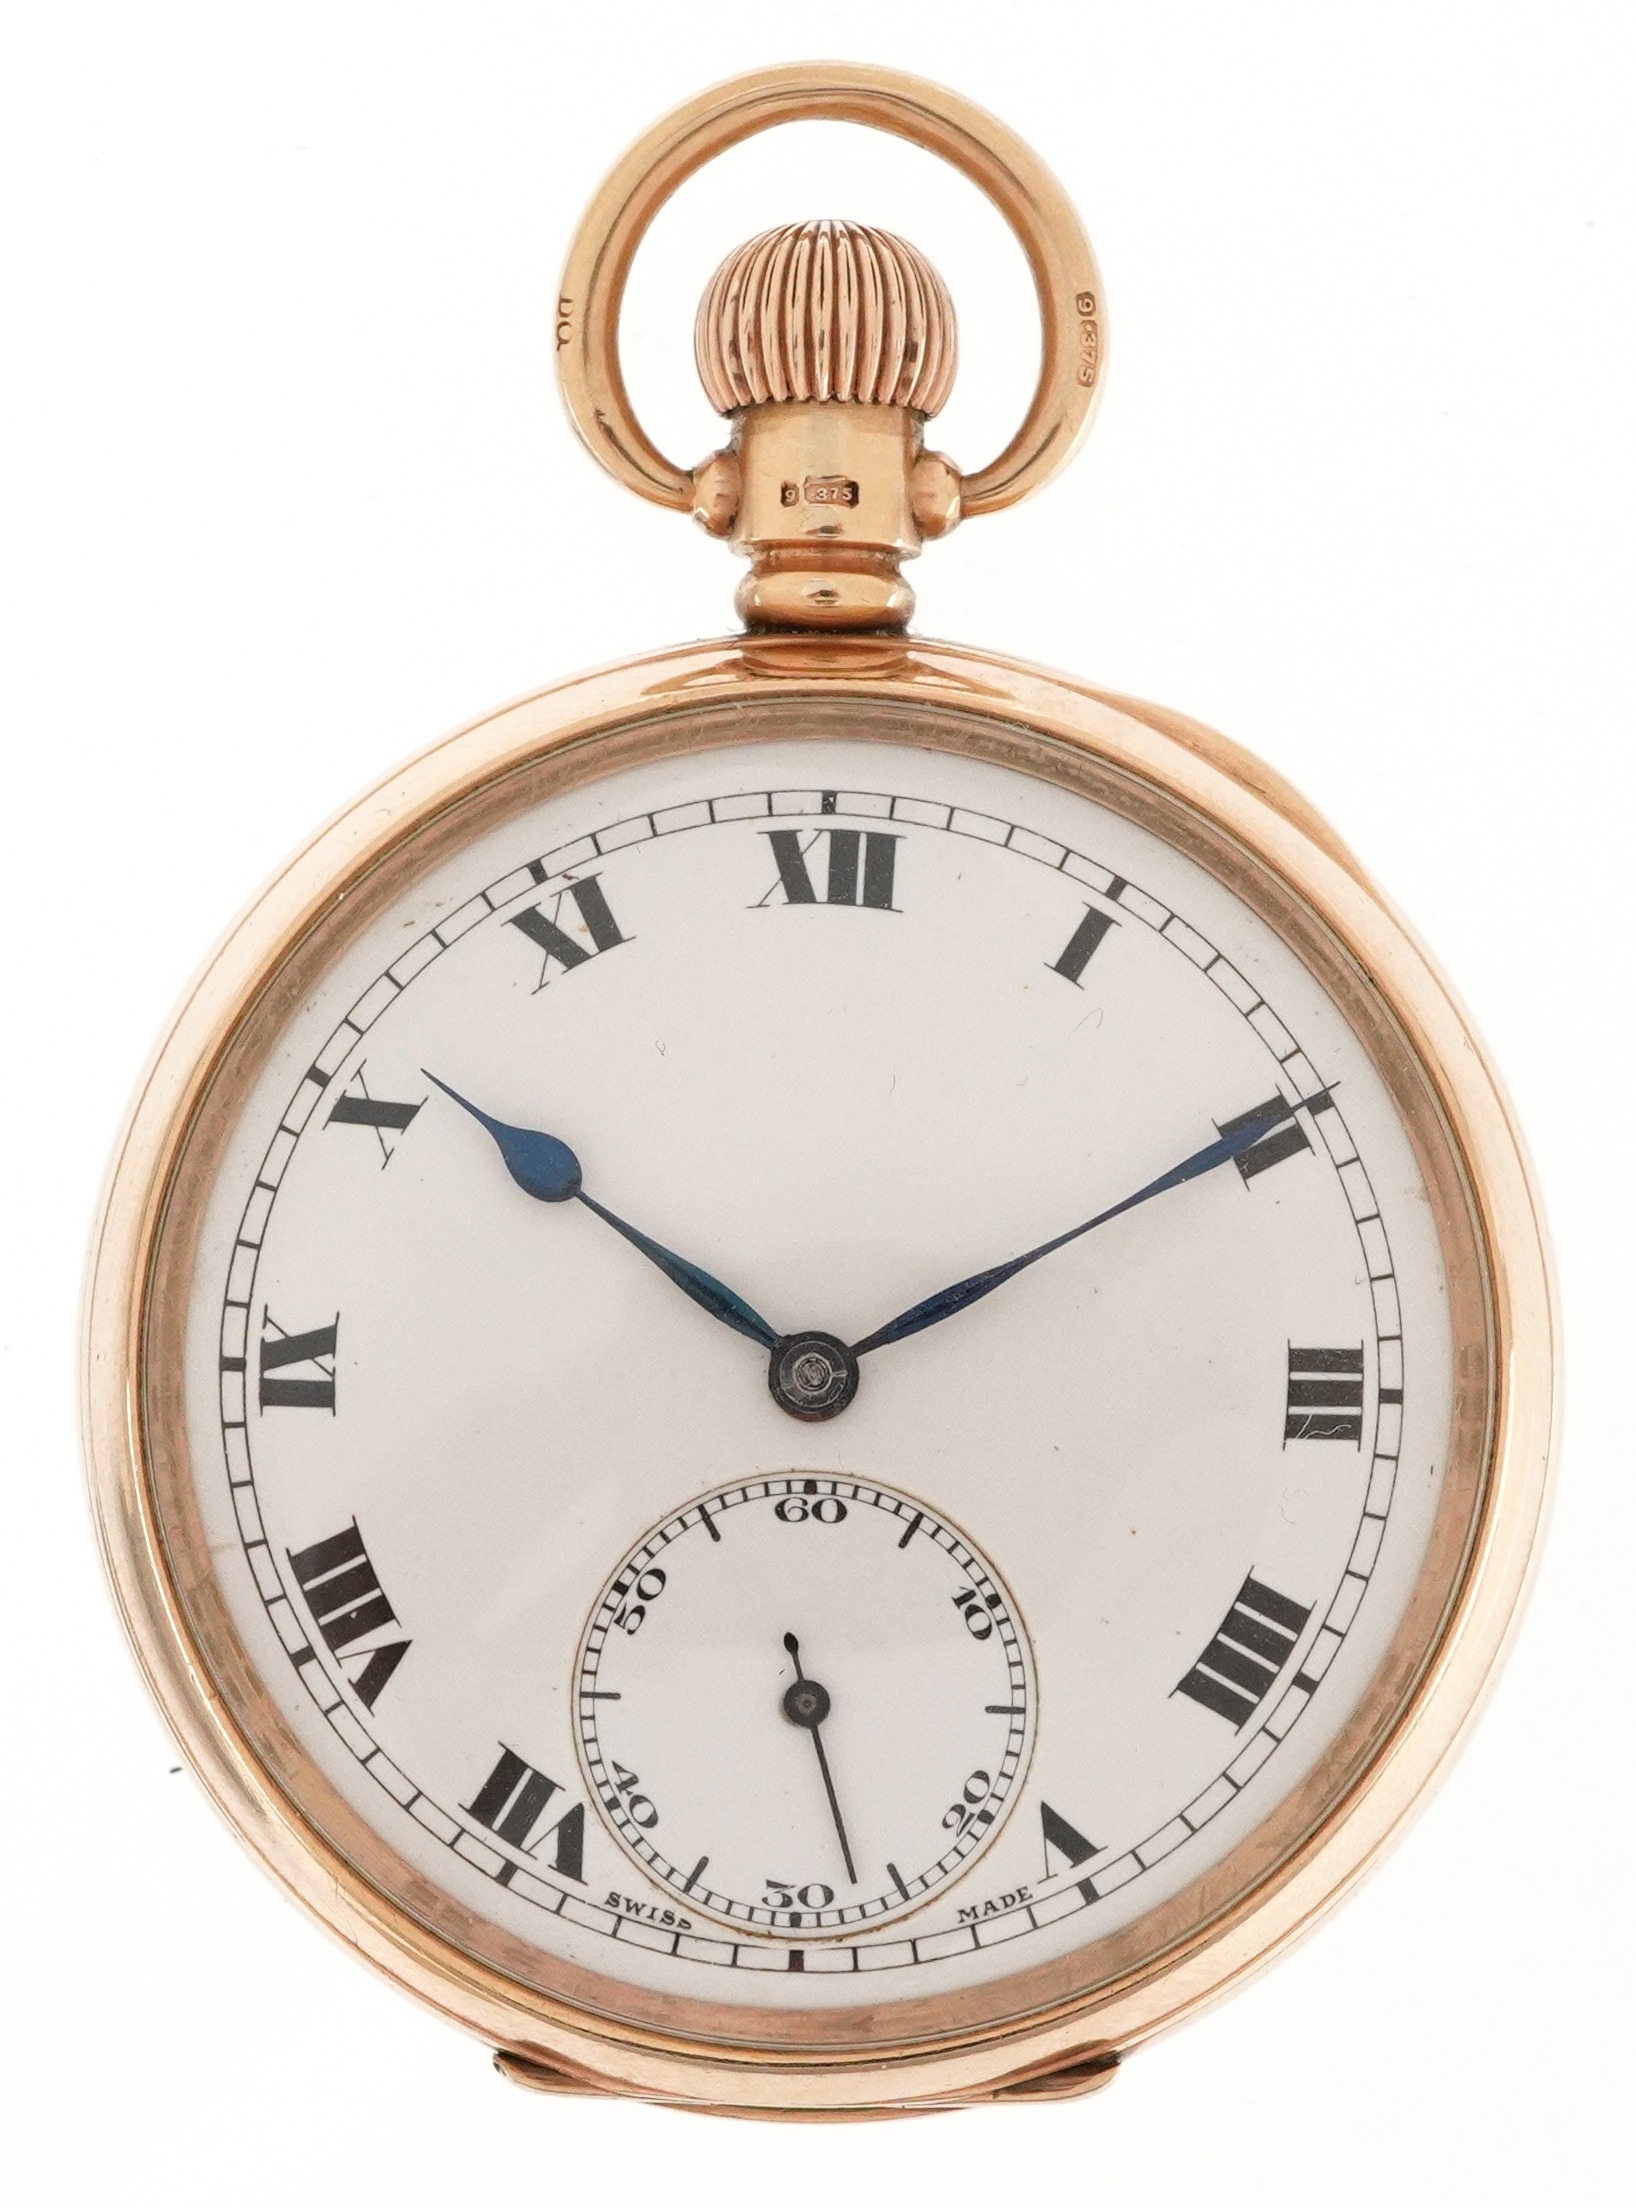 Doxa, gentlemen's 9ct gold open face keyless pocket watch having enamelled and subsidiary dials with